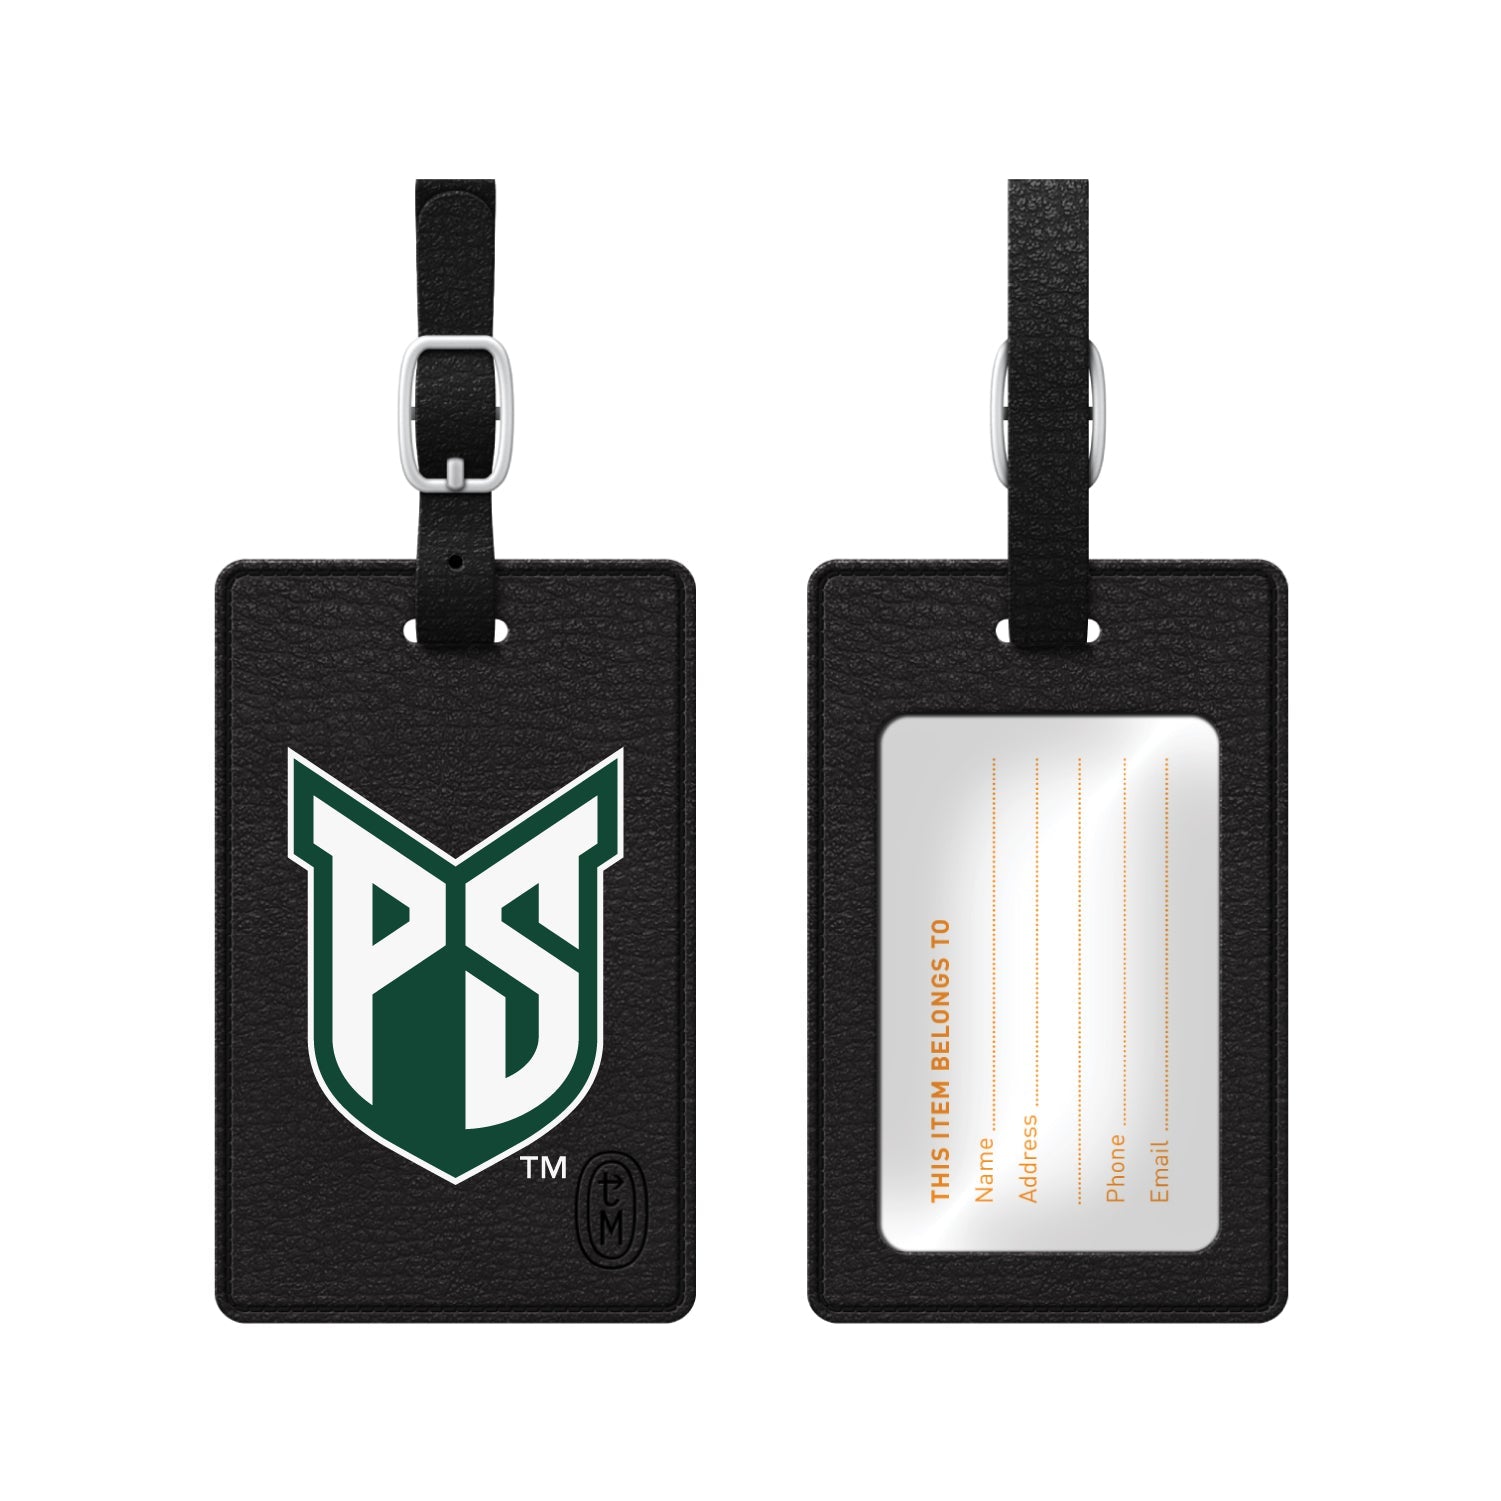 Portland State University Faux Leather Luggage Tag, Classic